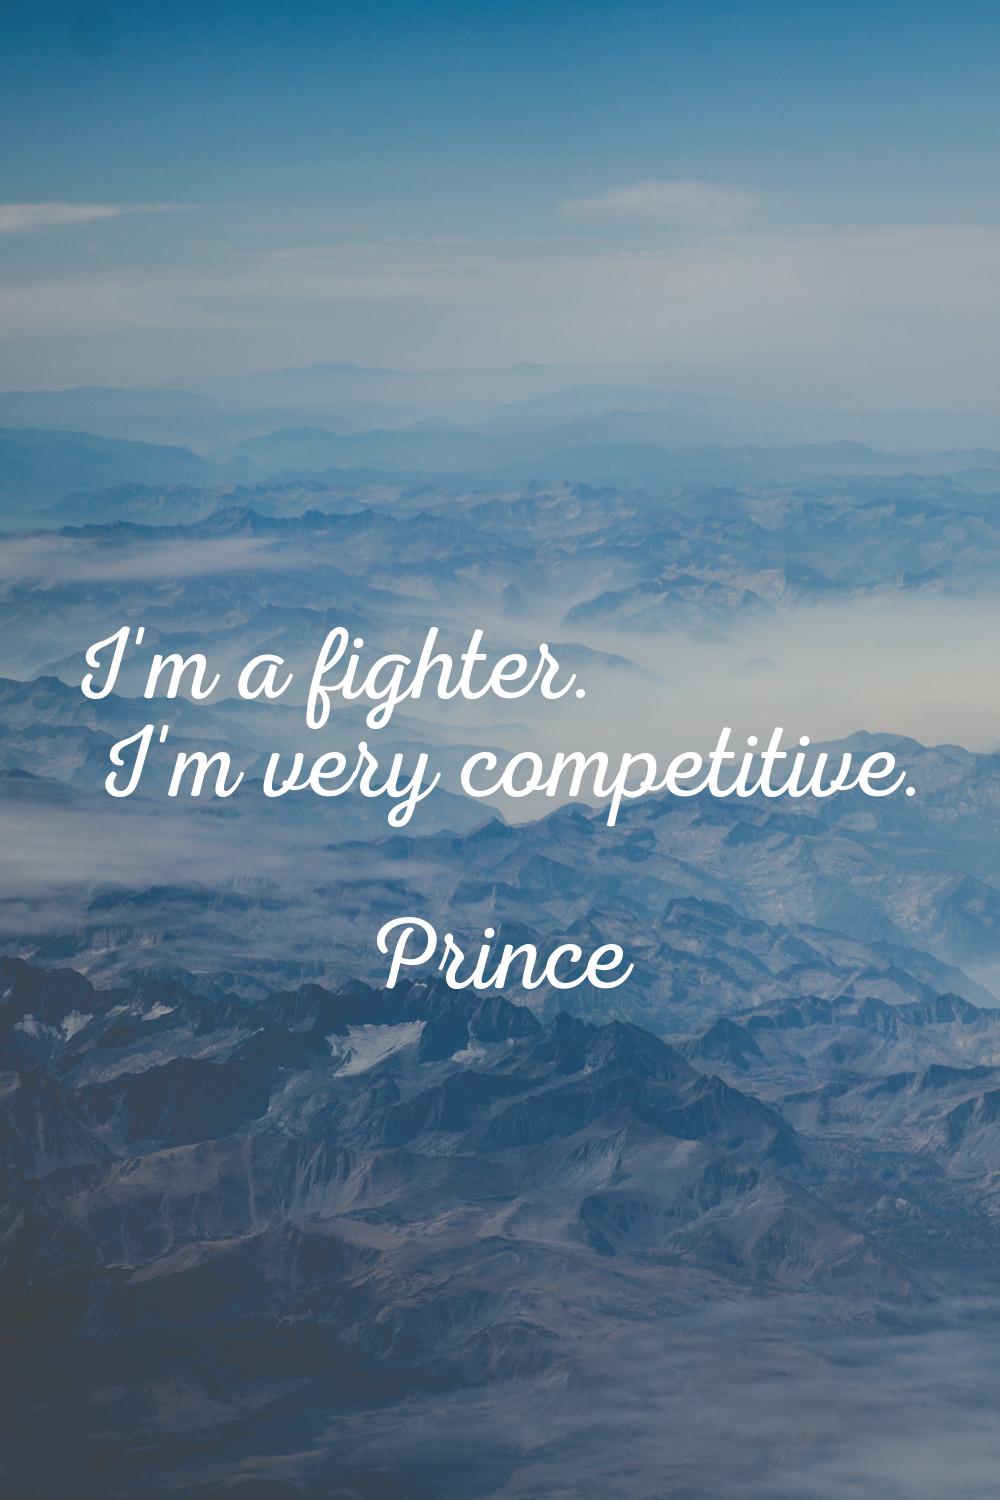 I'm a fighter. I'm very competitive.